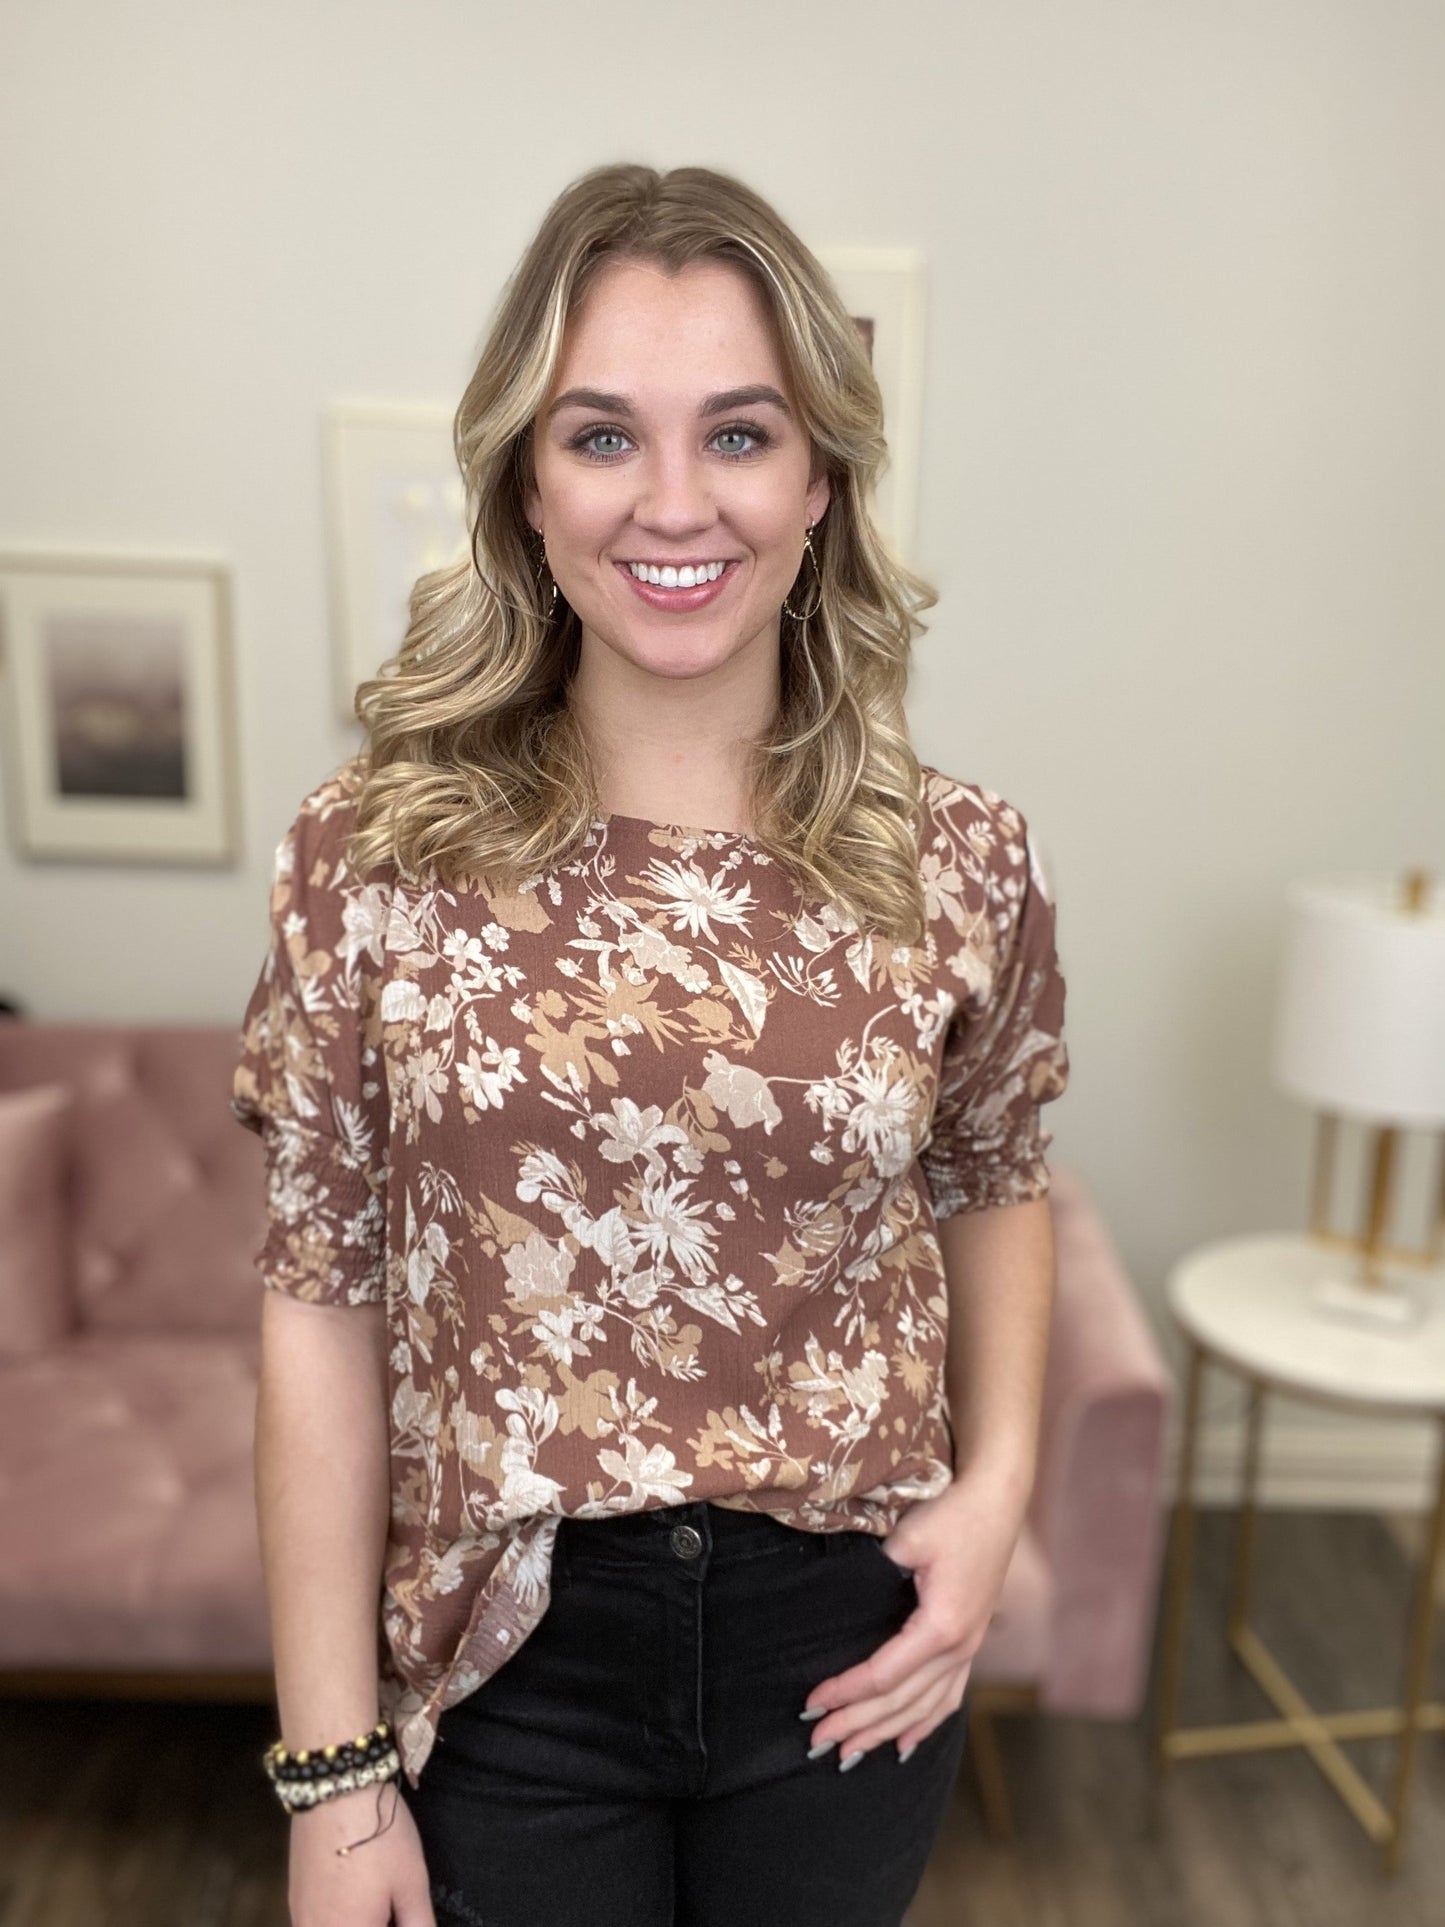 Amber Floral Top